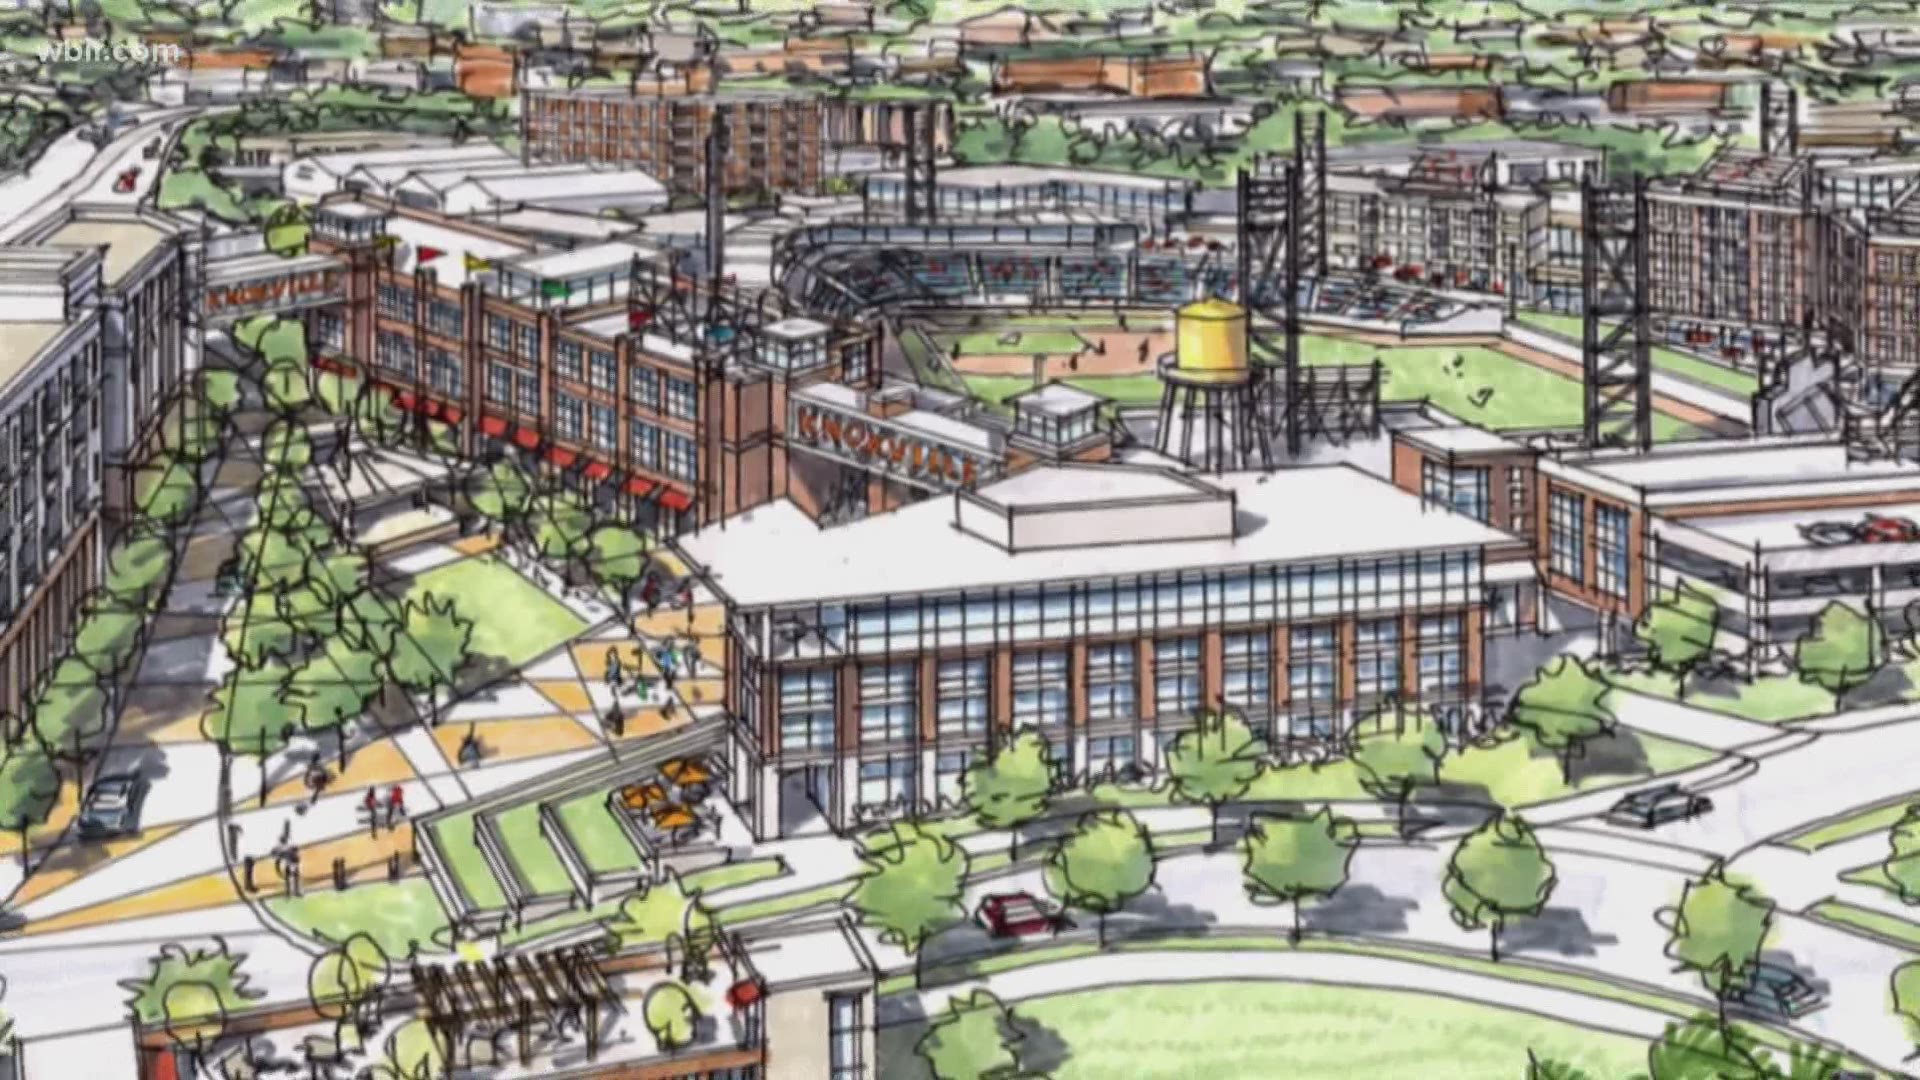 The development group looking to build a stadium in Downtown Knoxville is partnering with the Knoxville Area Urban League to ensure diverse participation.